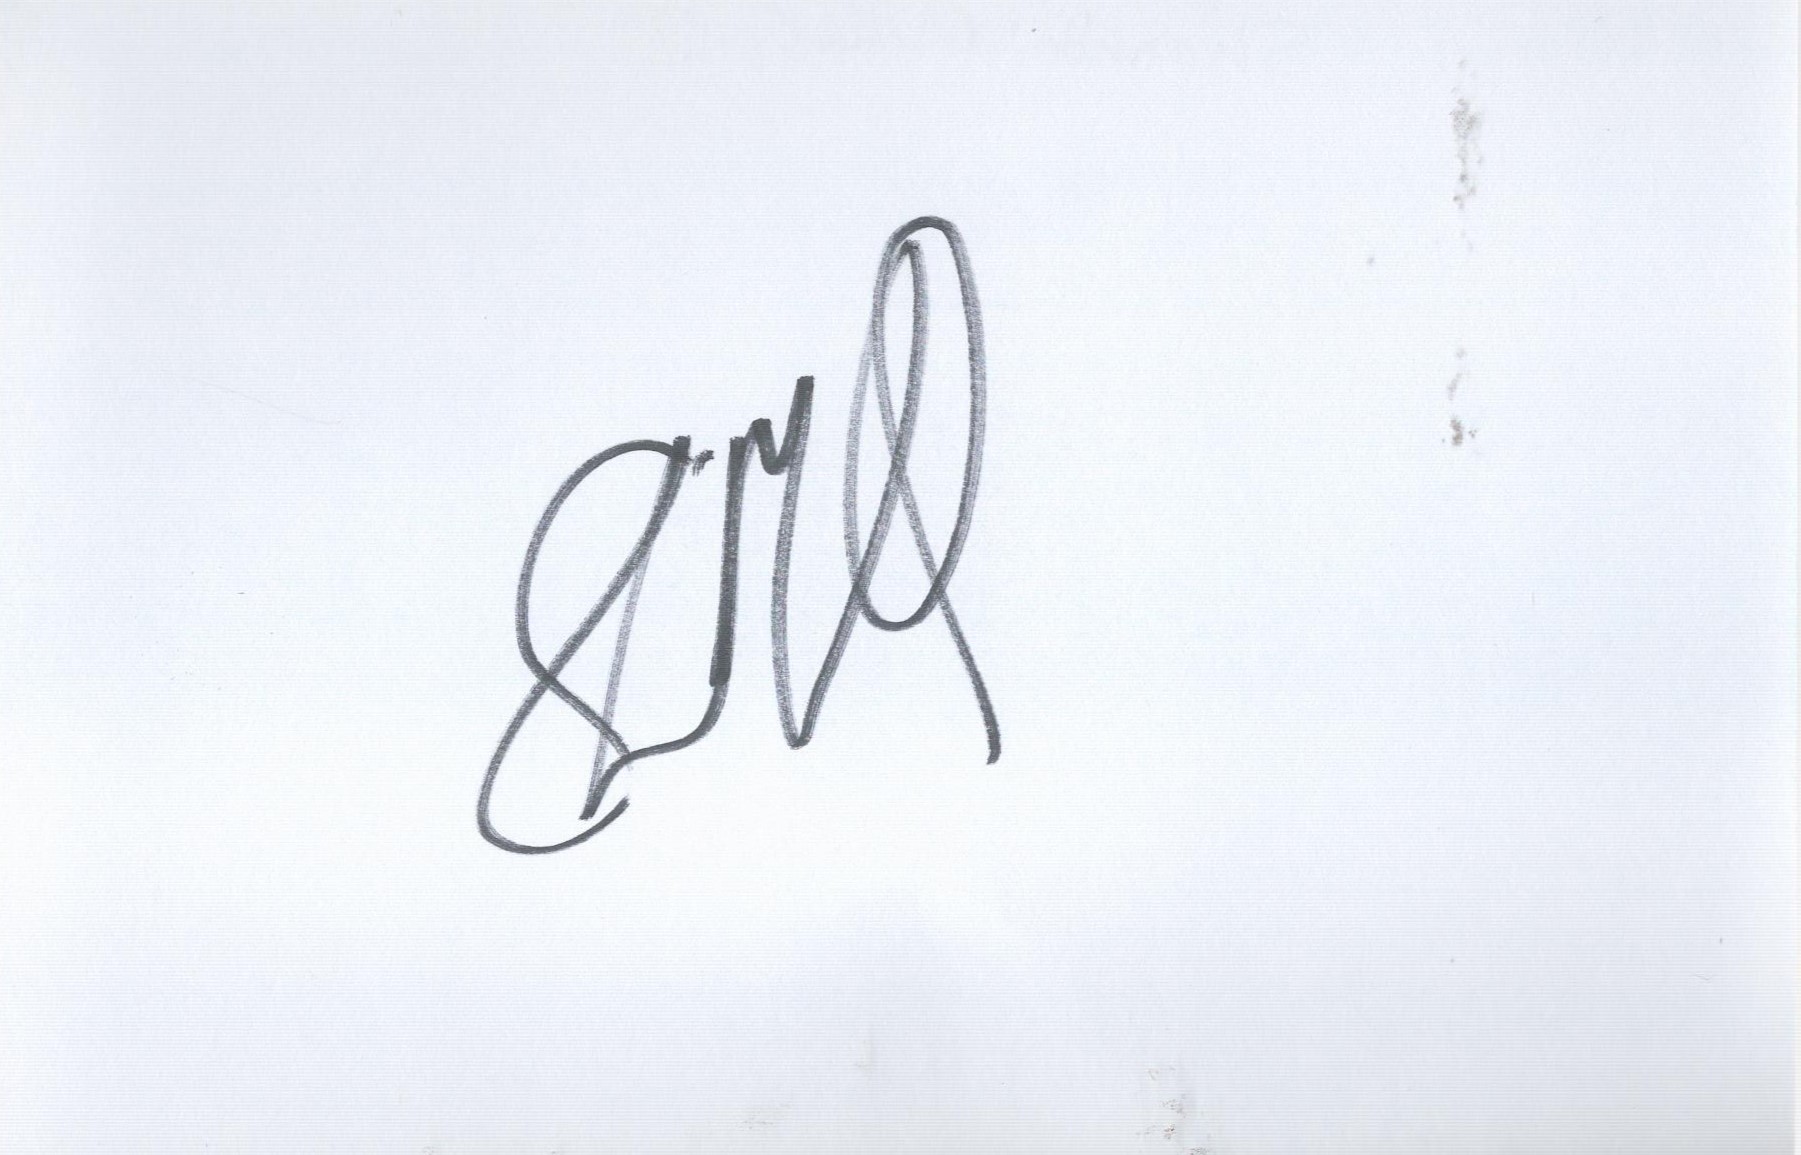 Shannon Miller white card (measuring approx. 6"x4") nicely signed in black sharpie pen by USA